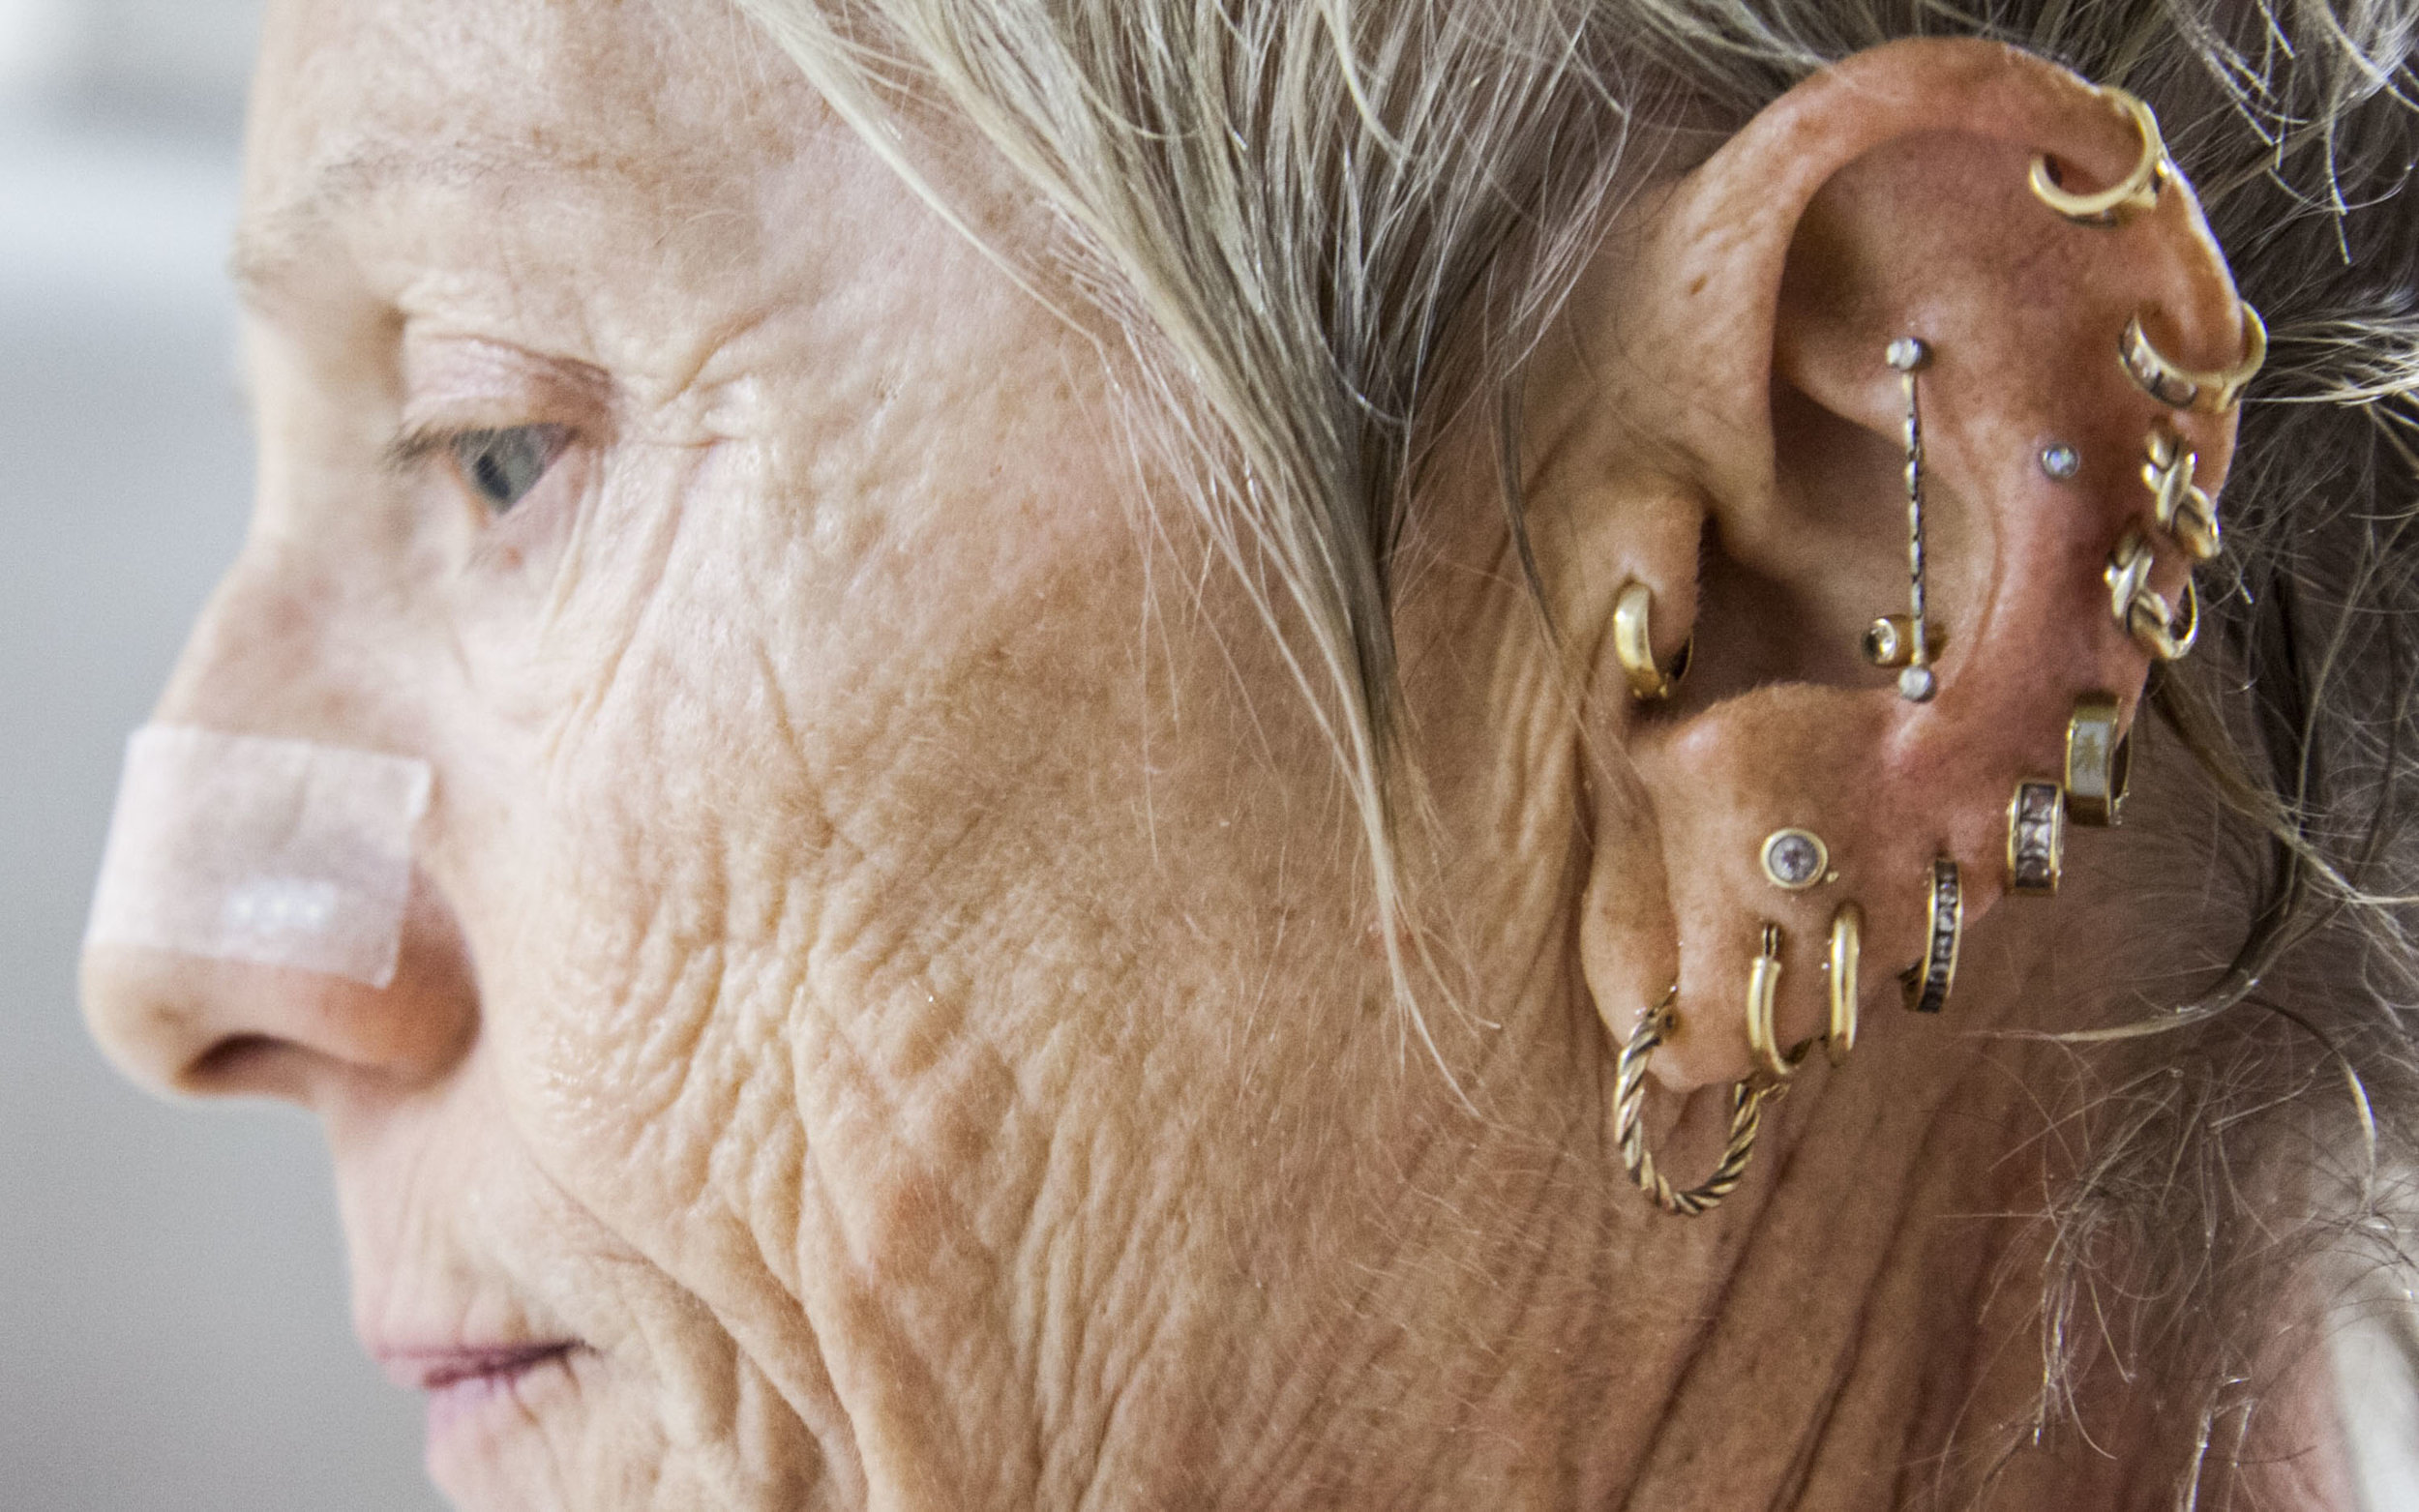  Sue Ketterer shows off her piercings during the 2015 National Senior Games swim meet. This swim meet took place at the University of Minnesota's Aquatic Center on July 4th, 2015. 